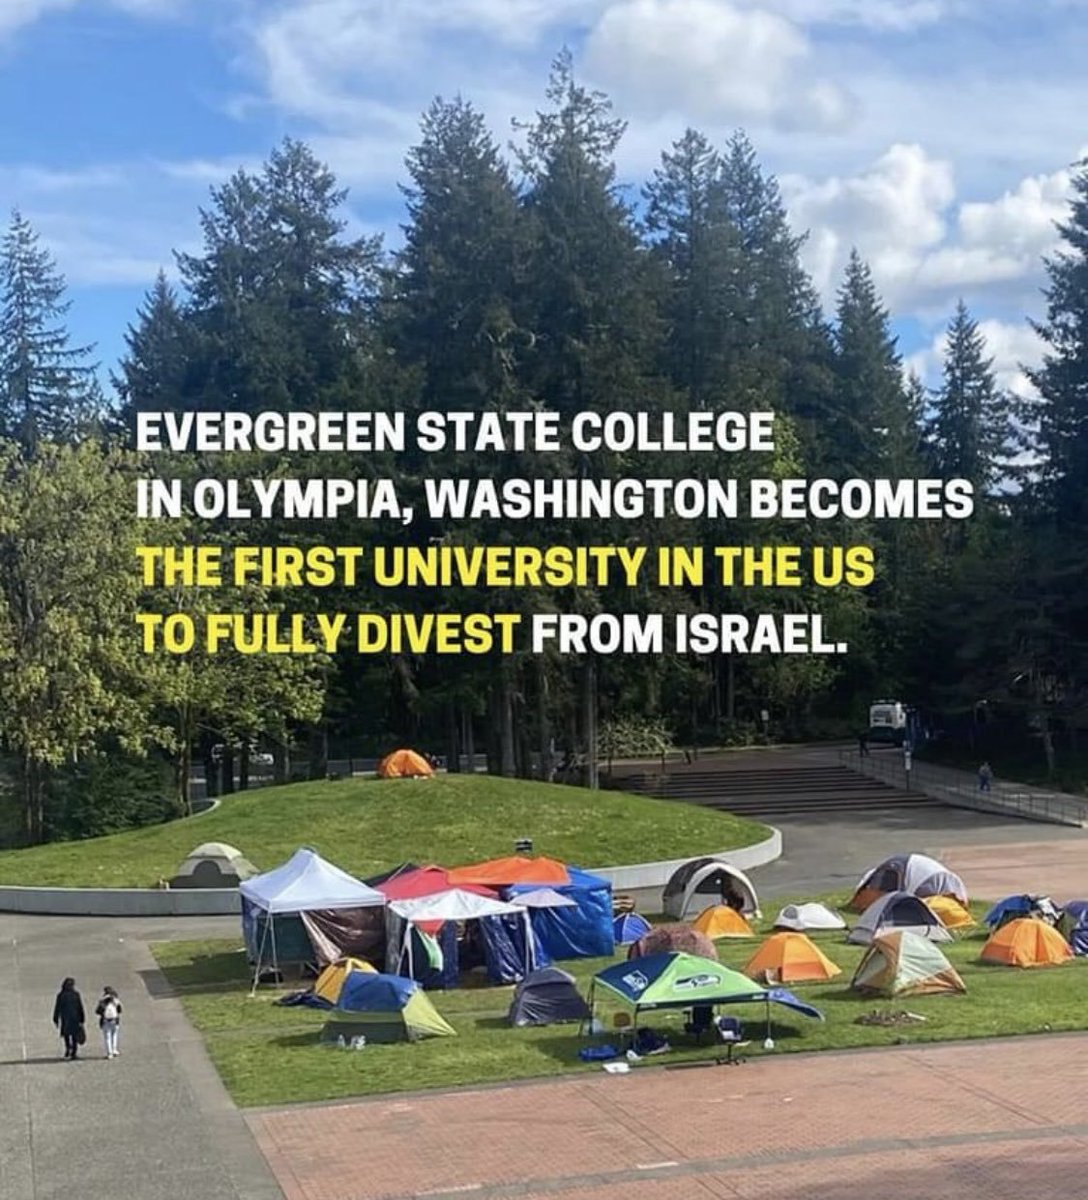 After weeks of pro-Palestine encampment on its premises, Evergreen State College in Olympia has reportedly responded to the protesters' demands by committing to fully divest from Israel.